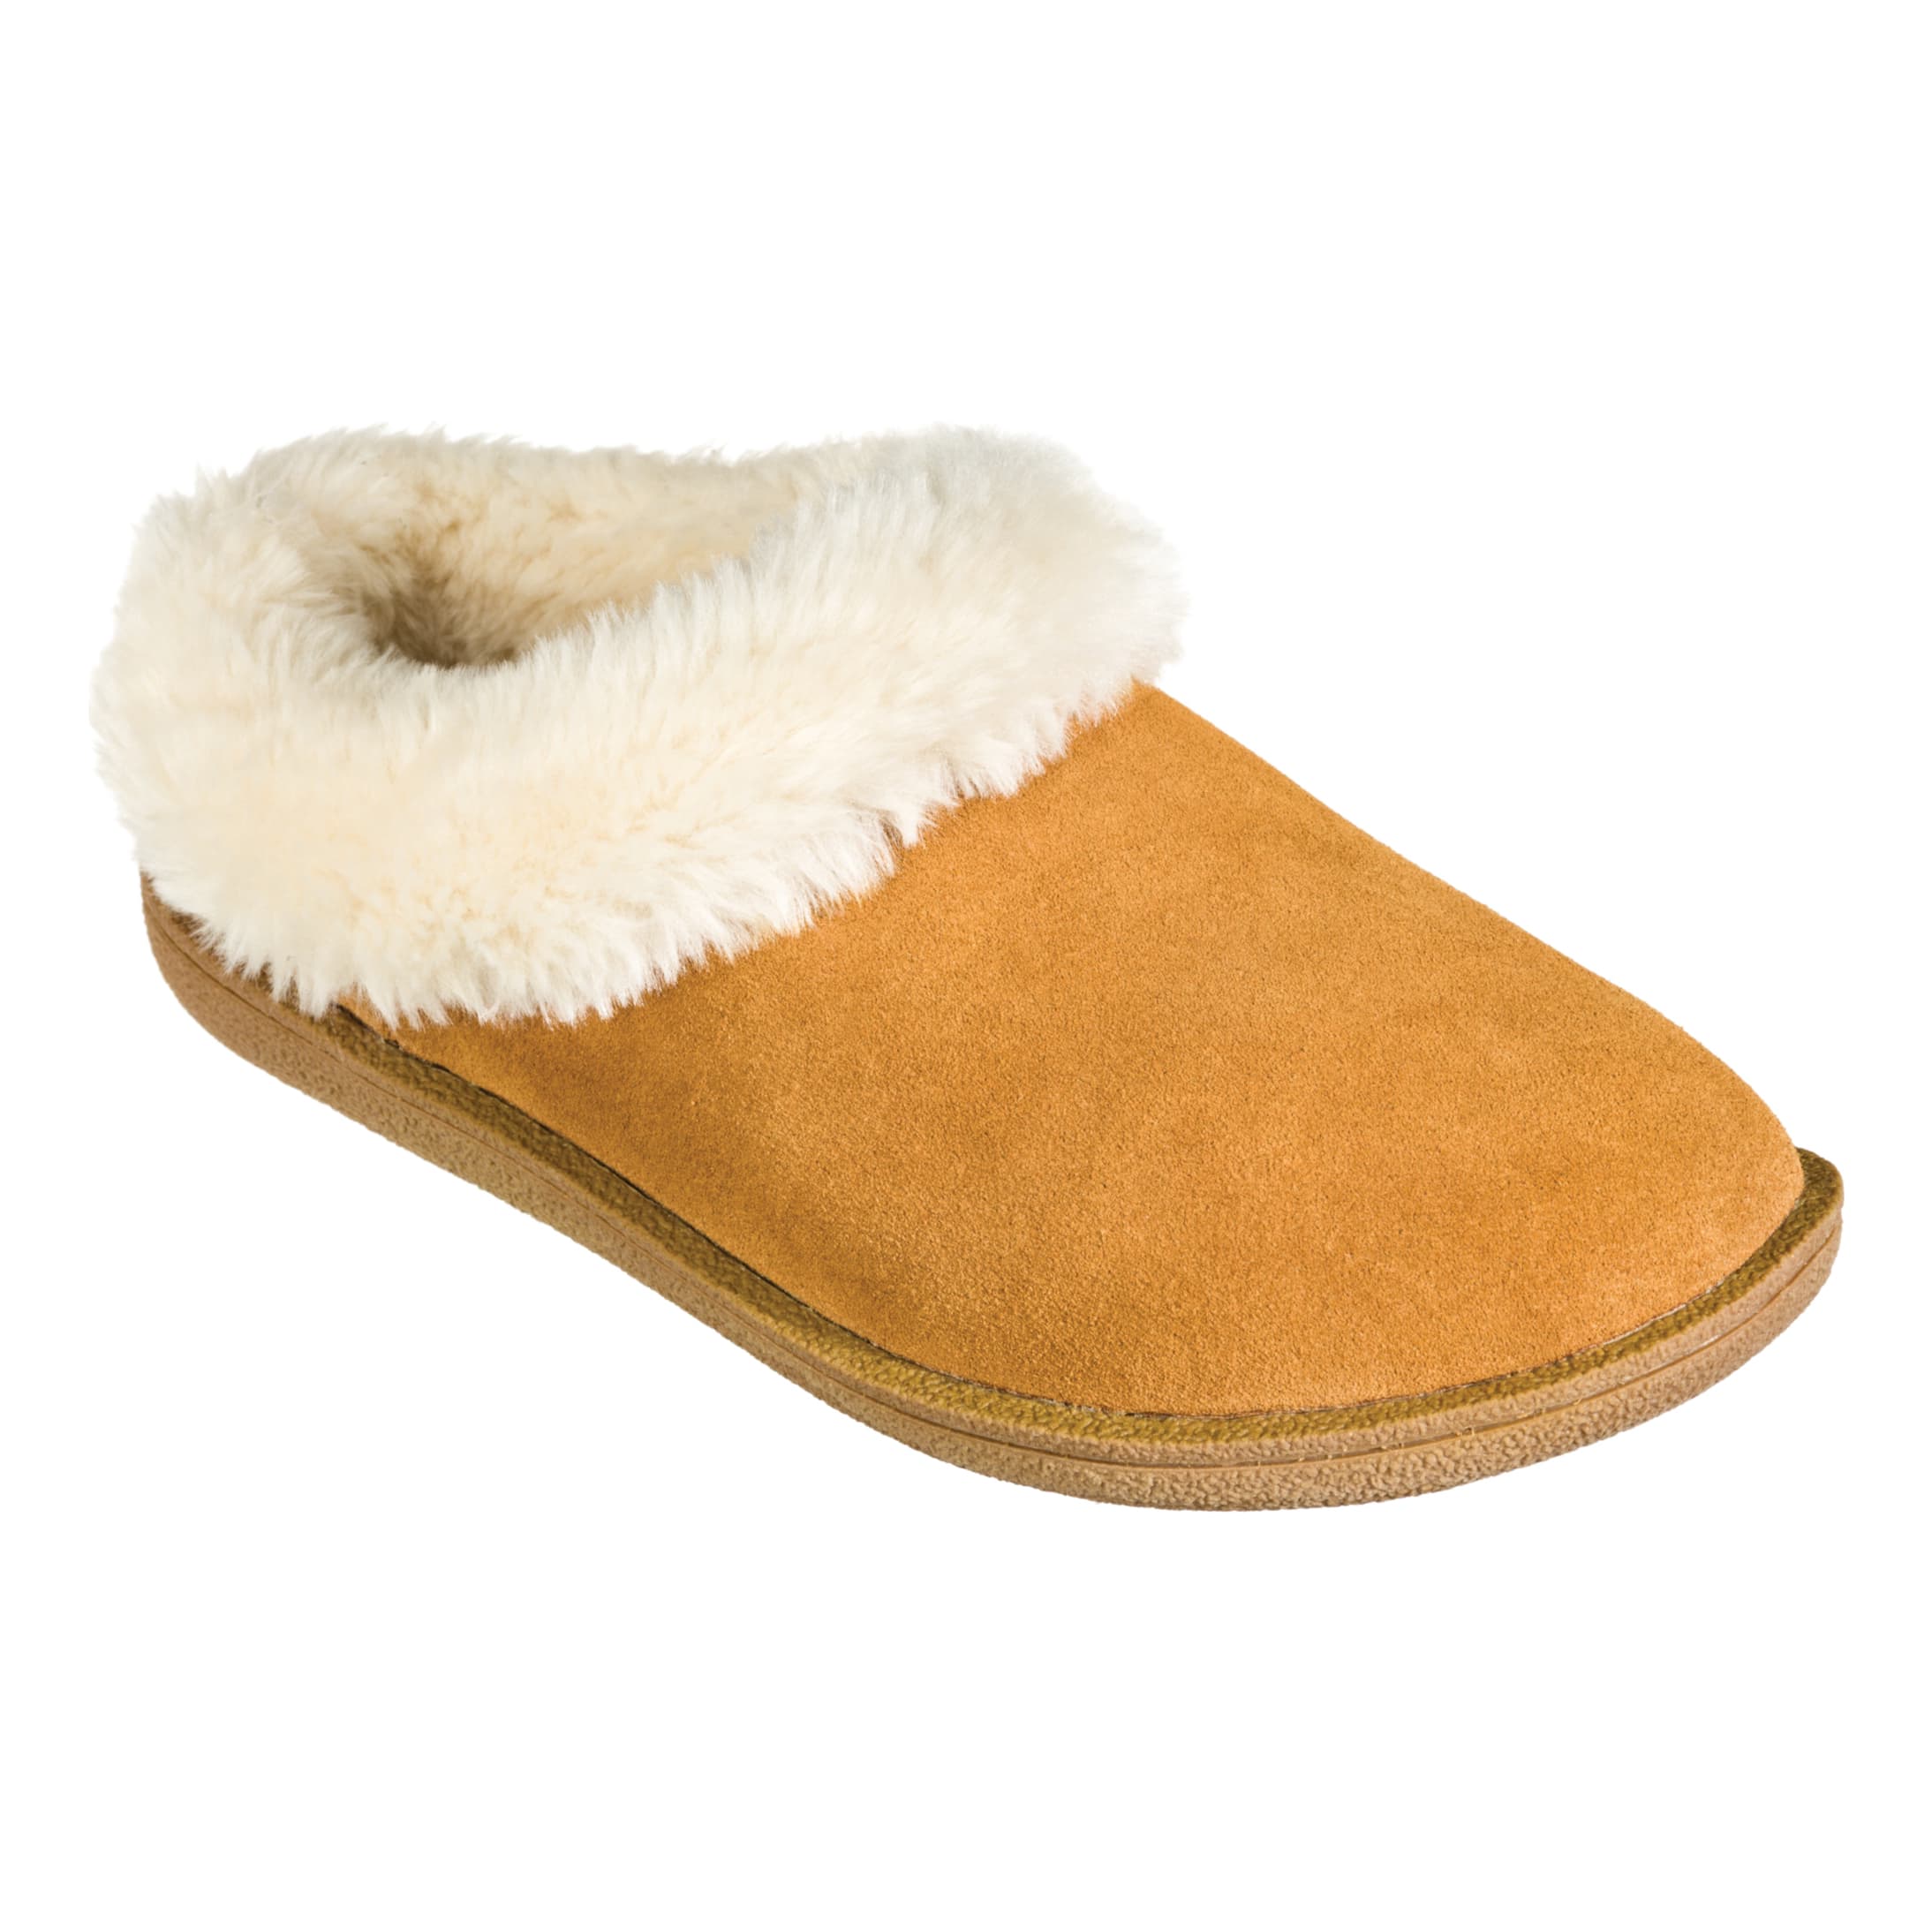 Natural Reflections® Women’s Lexi Scuff Slippers - Chestnut